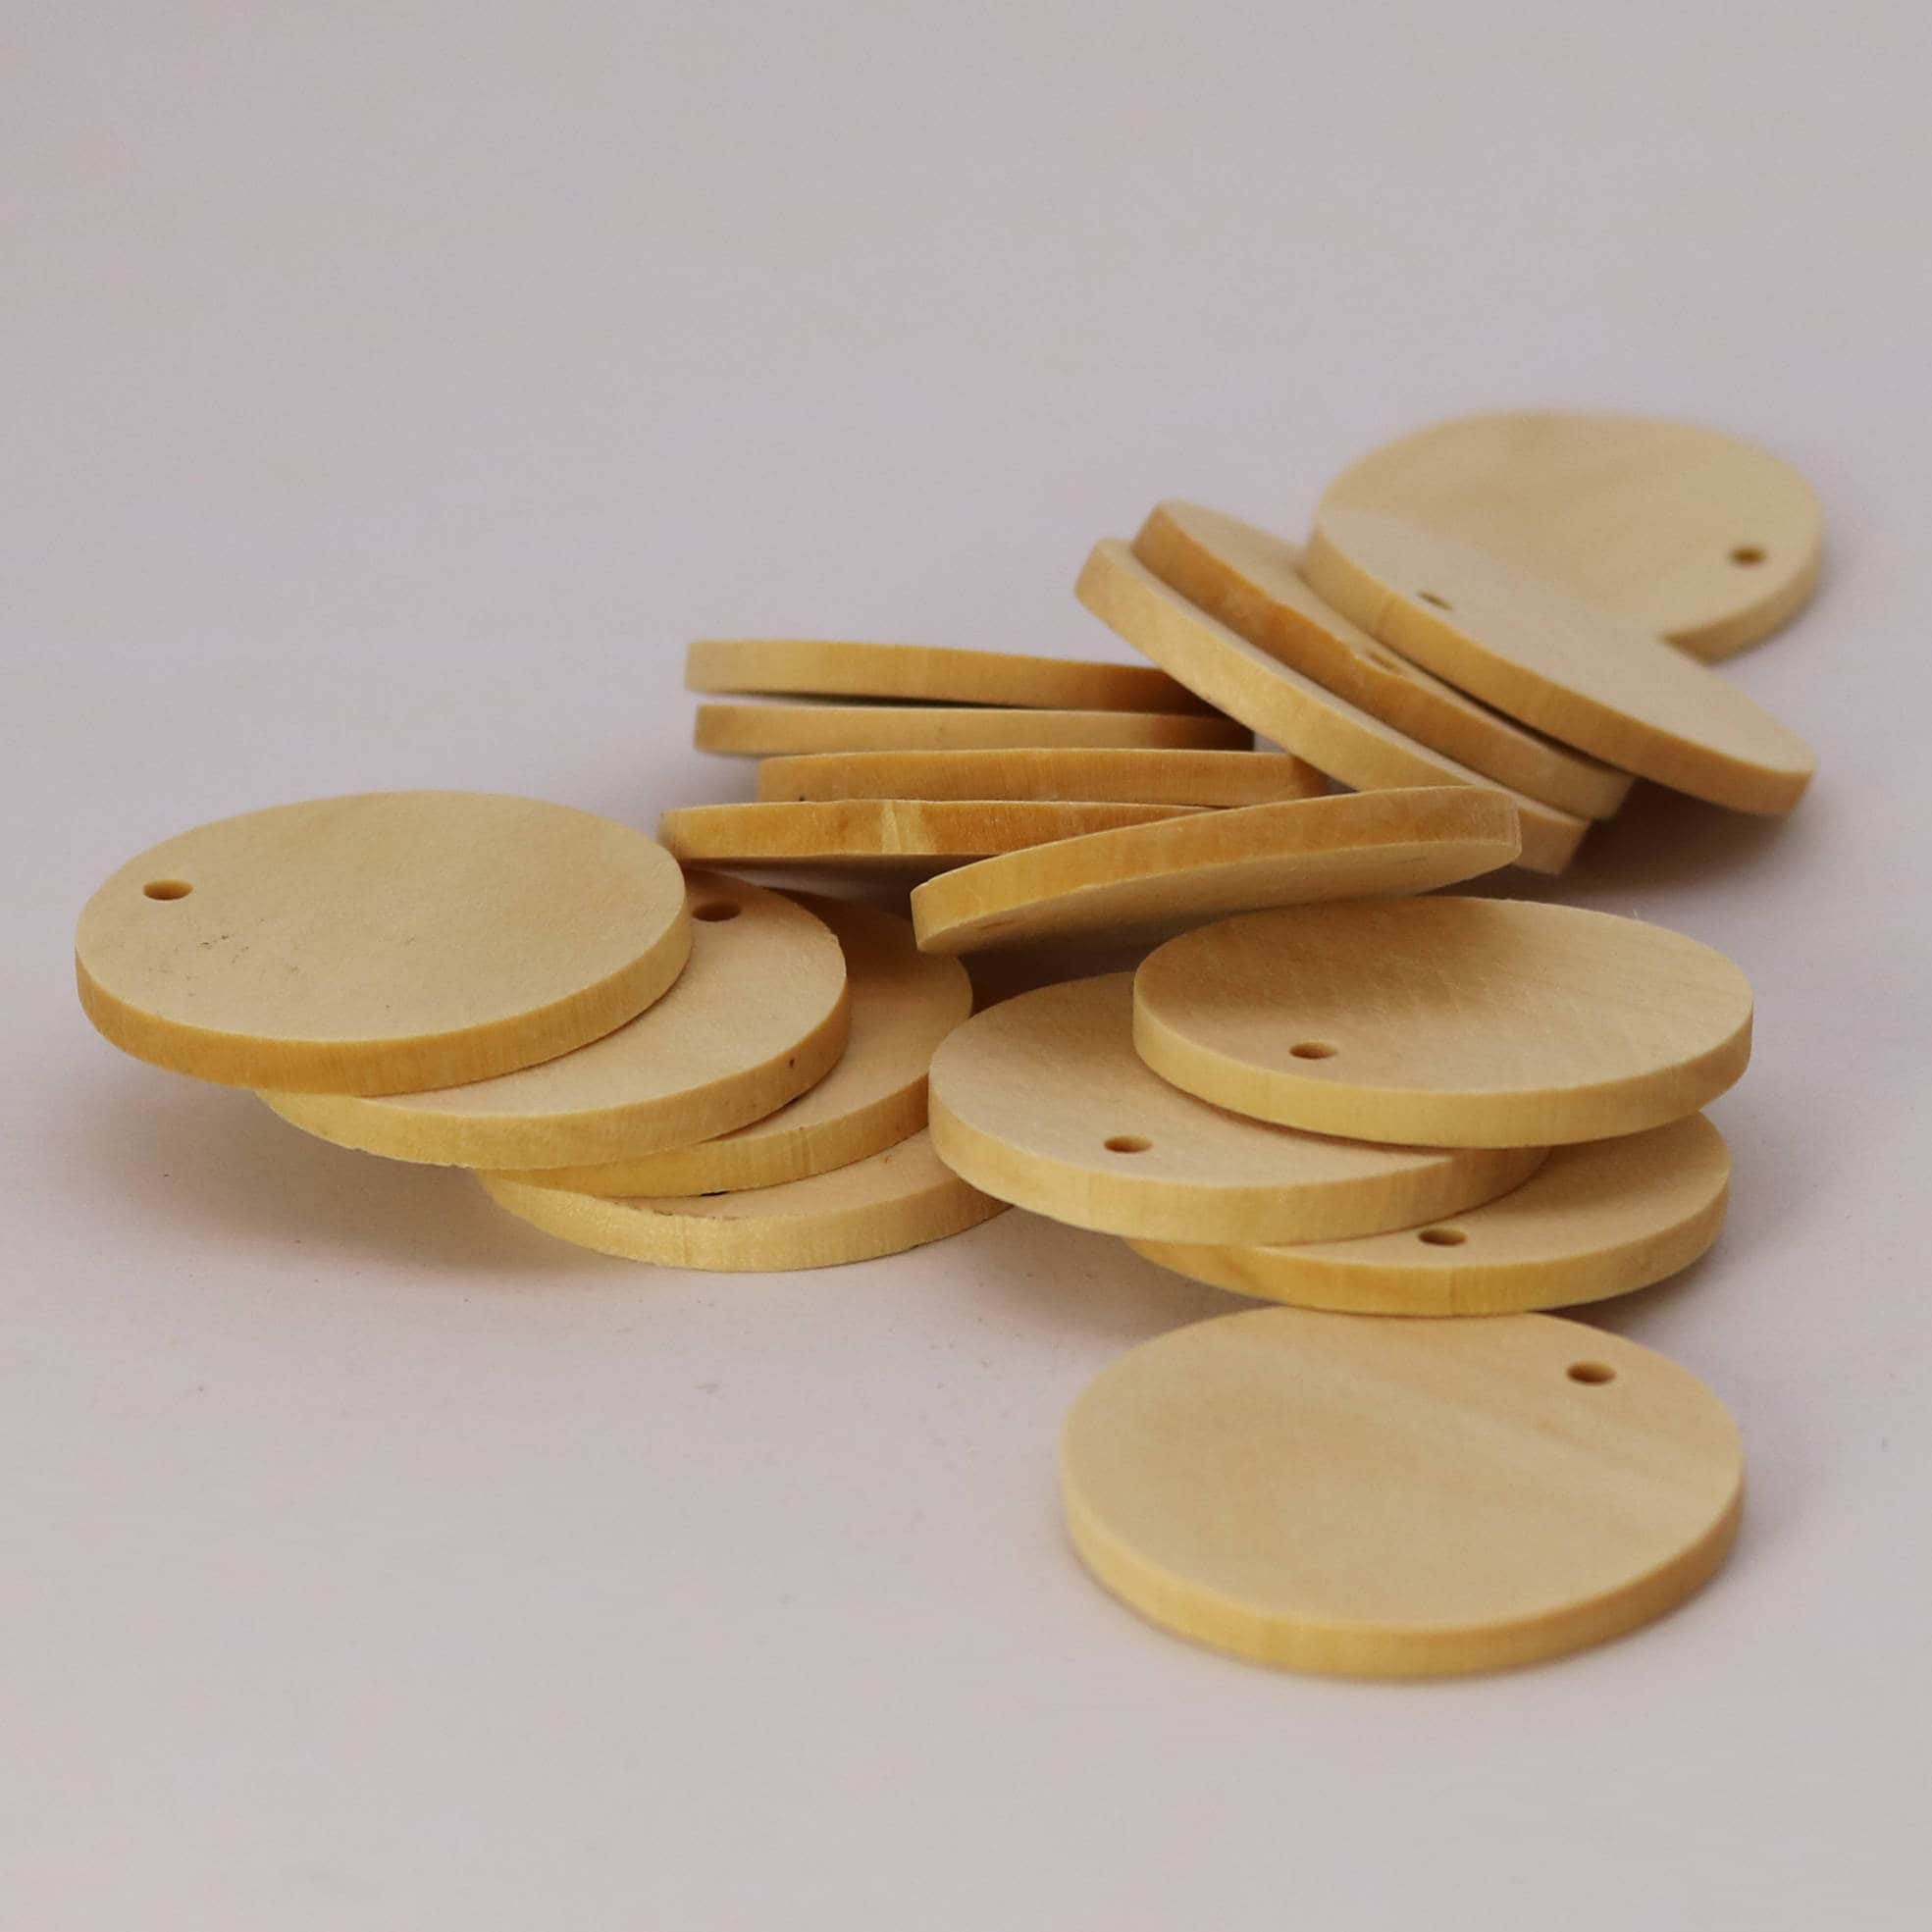 30 Pcs 6 inch Unfinished Wood Circles, Thickness 6mm, Wooden Rounds for Crafts, Wood Discs for DIY Painting Decorations, Weddings and Parties,by